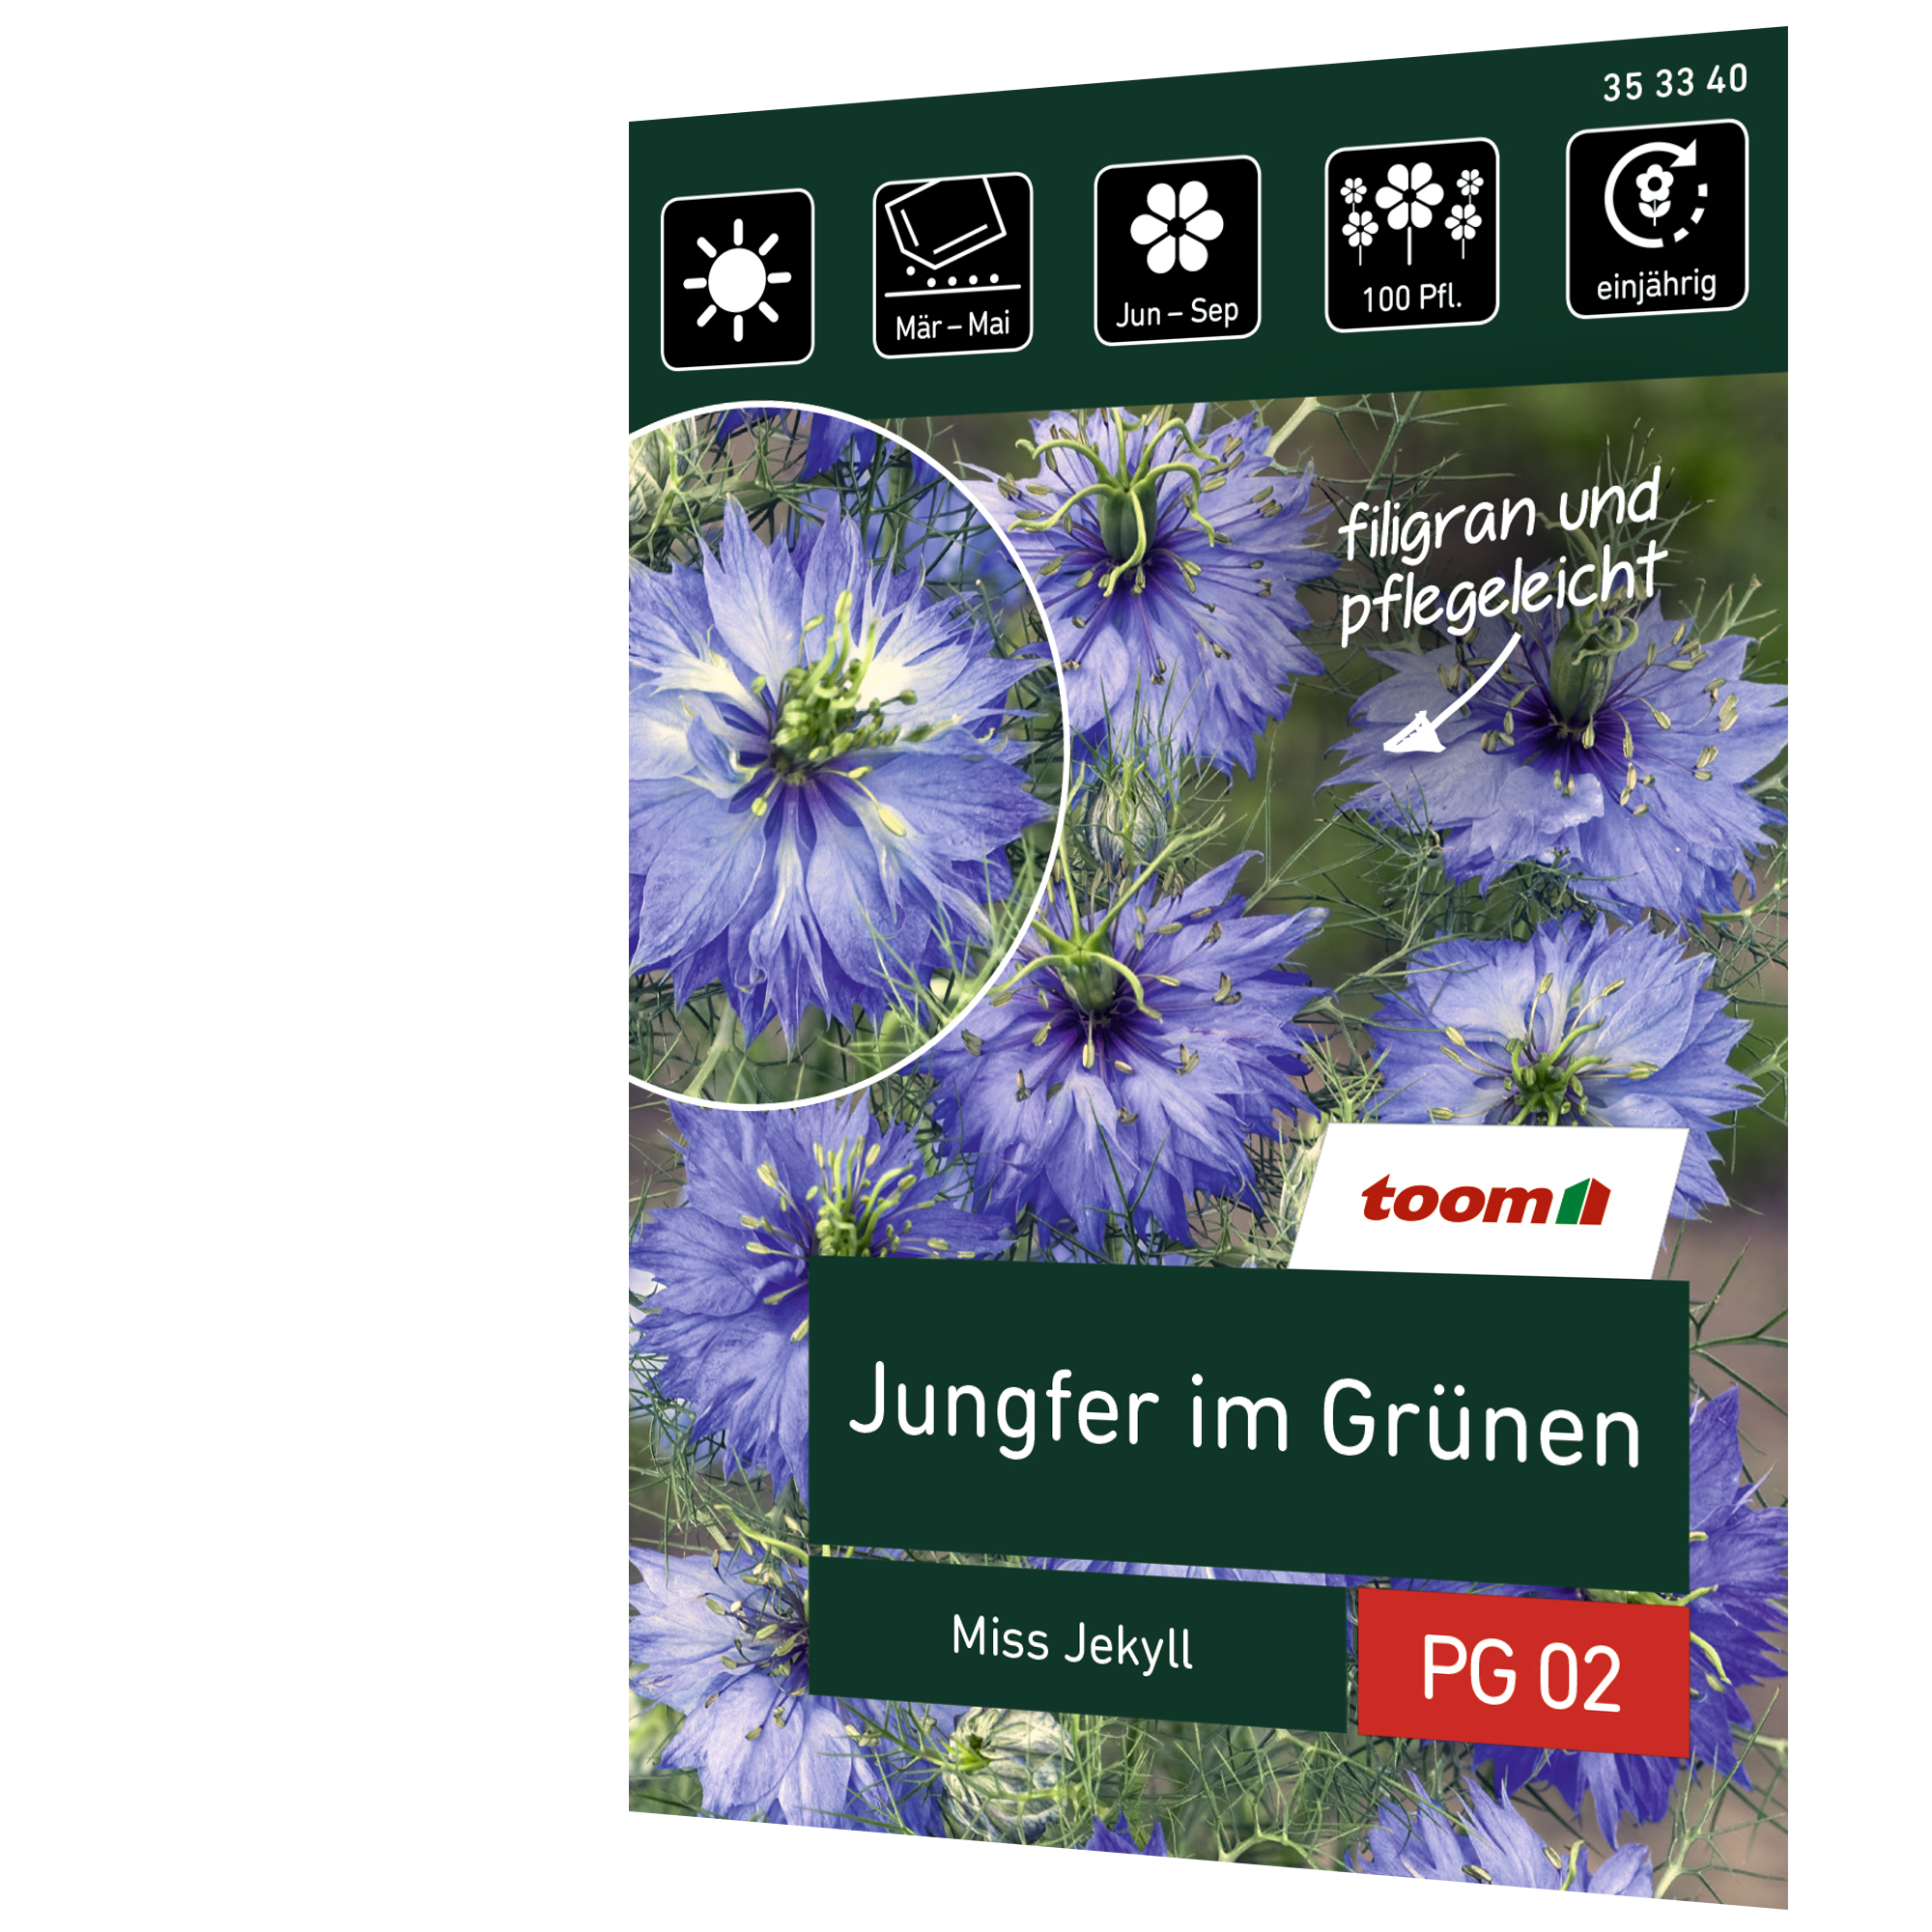 Jungfer im Grünen 'Miss Jekyll' + product picture